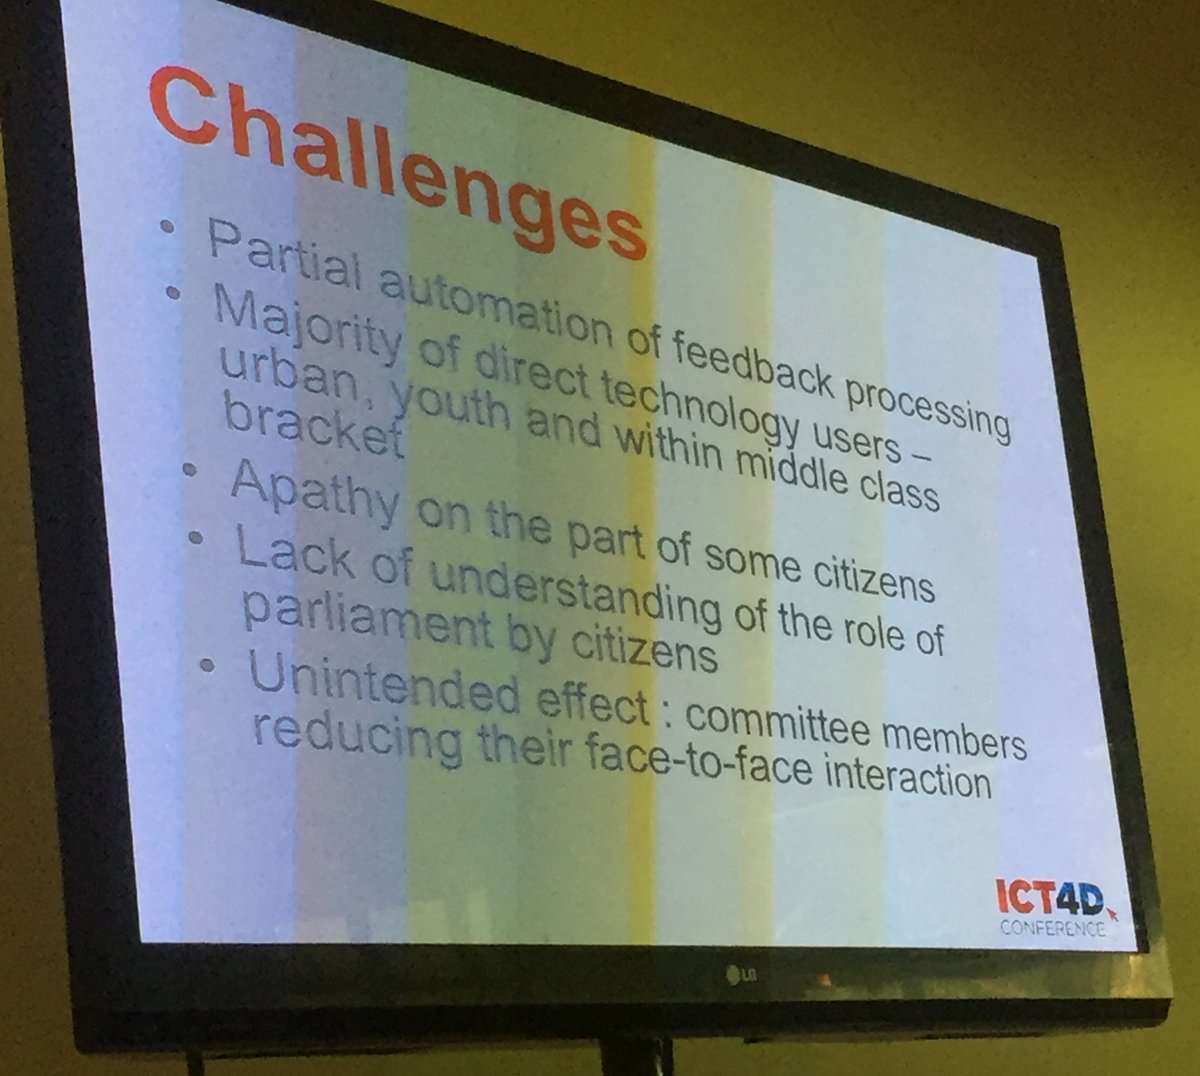 Challenges hindering ICT use in governance @penplusbytes #ICT4D2016